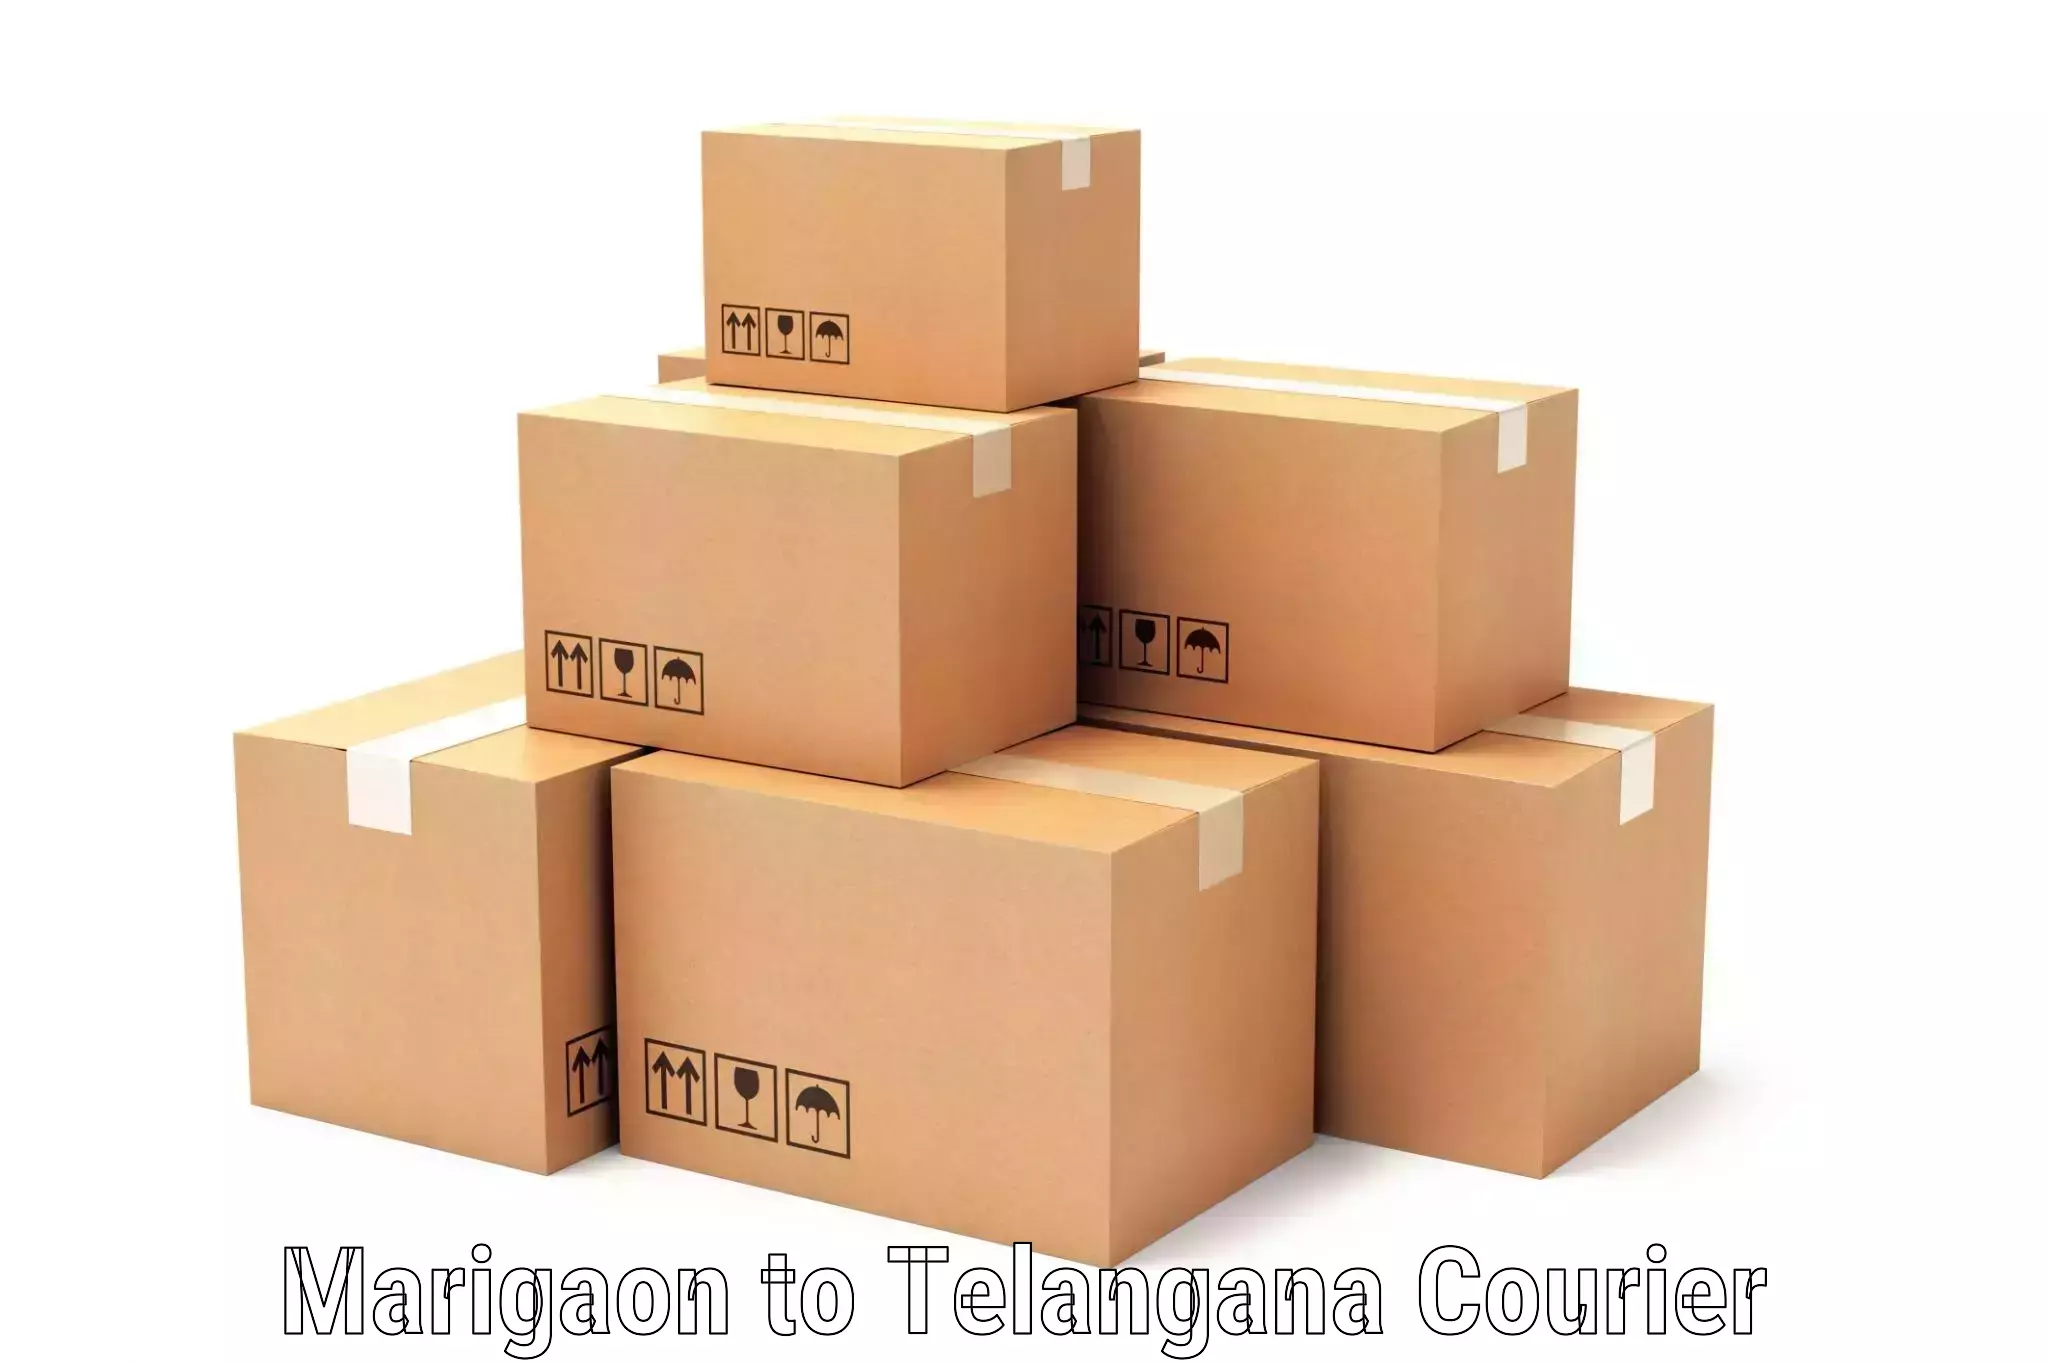 Online package tracking Marigaon to Nirmal